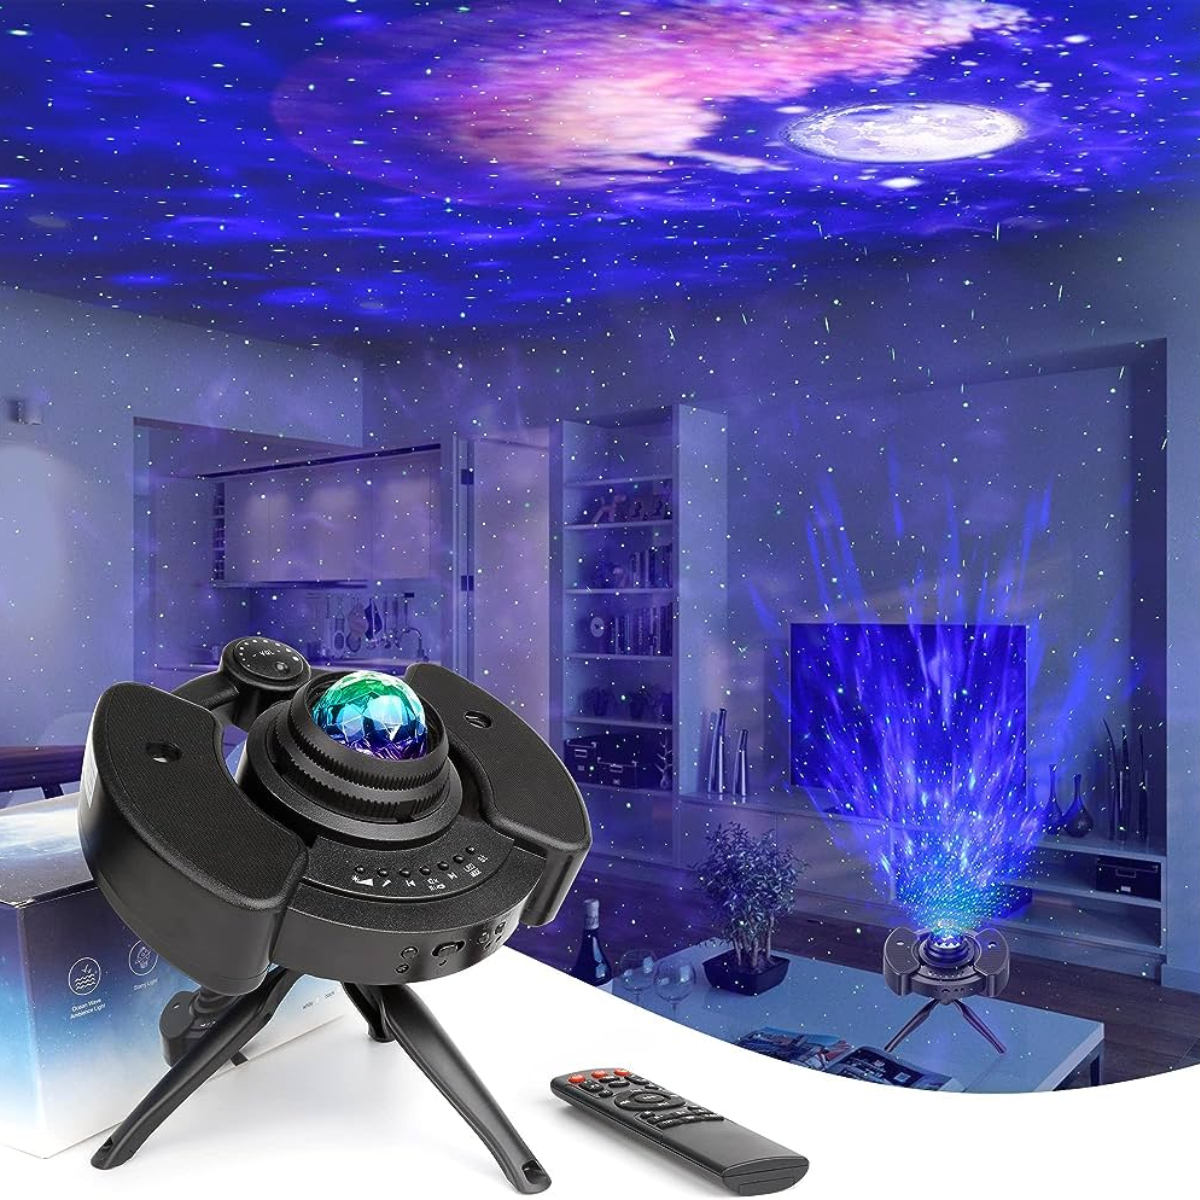 45. Transport Him to the Stars with a Starry Sky Projector - The Perfect Anniversary Gift